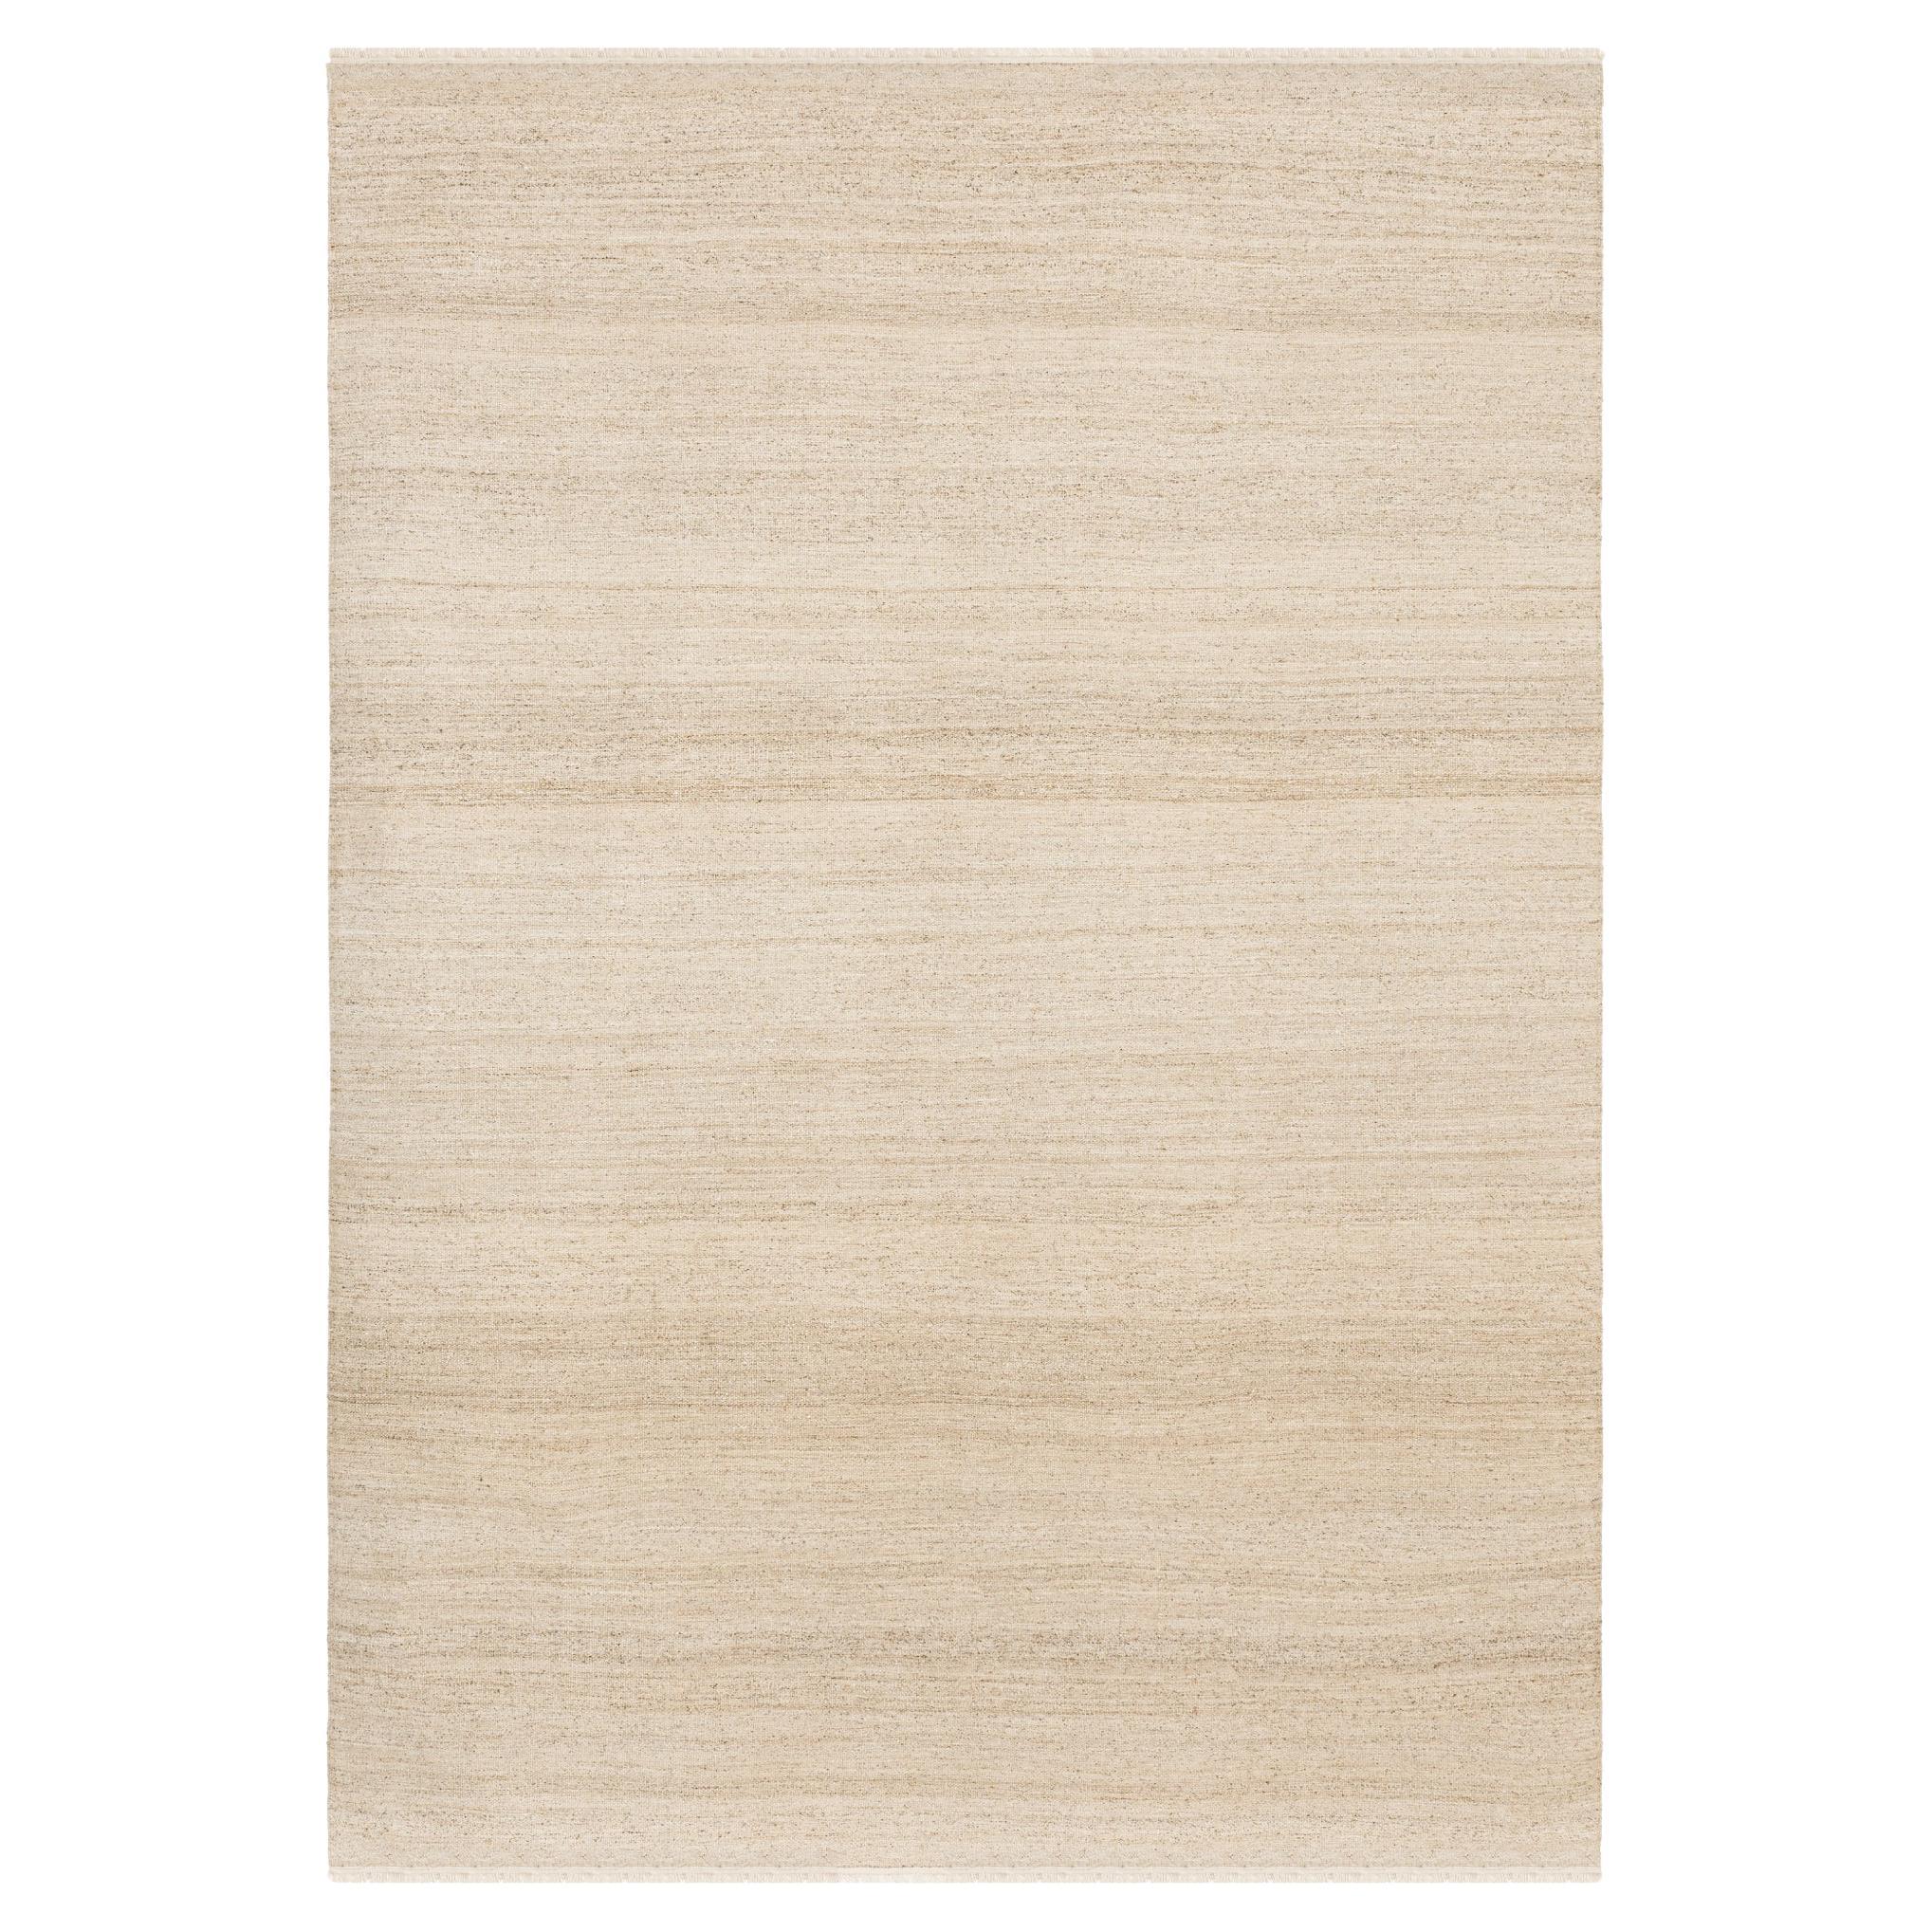 Nettle Dhurrie Natural Undyed Flatweave Rug by Knots Rugs